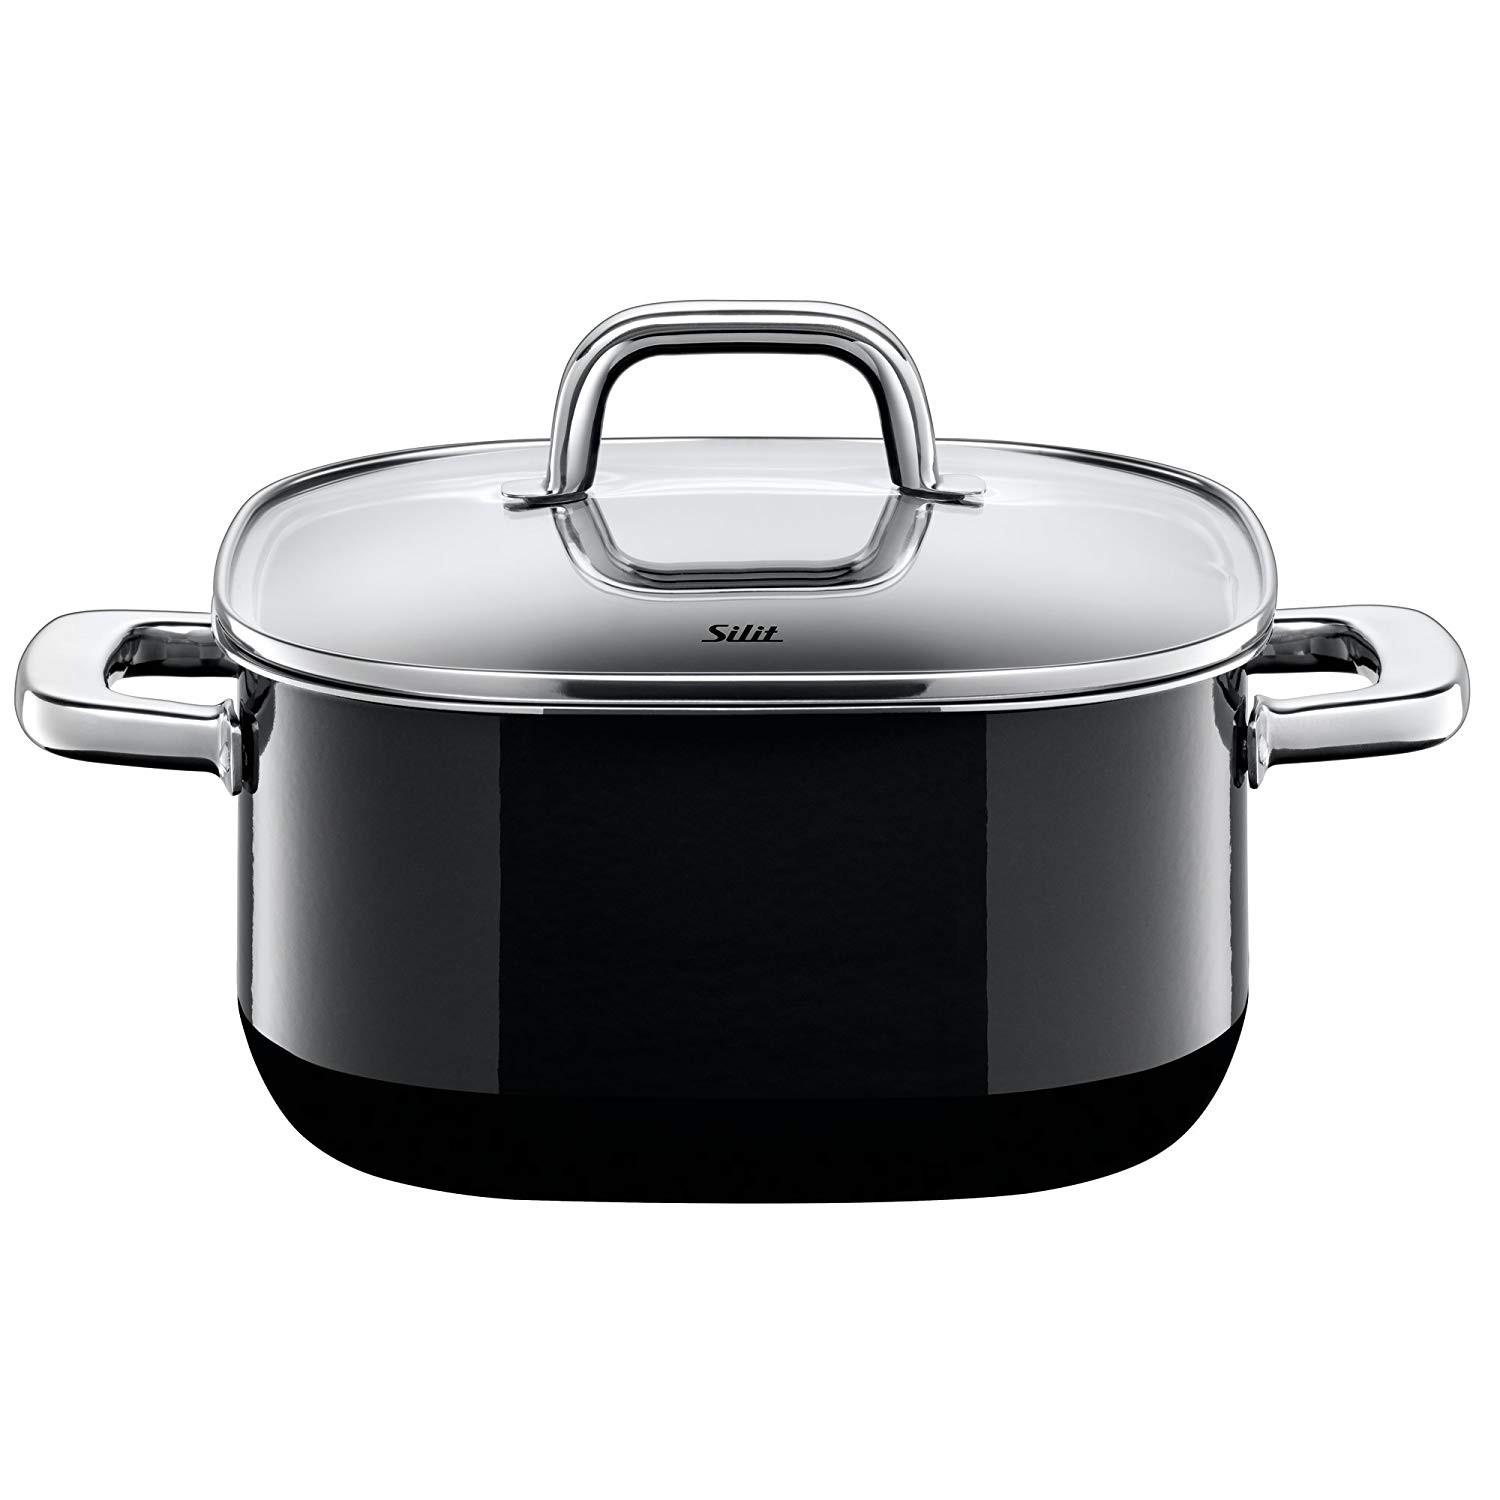 Silit Quadro Black, Stewing Pot, With Lid, Silargan, Suitable For Induction